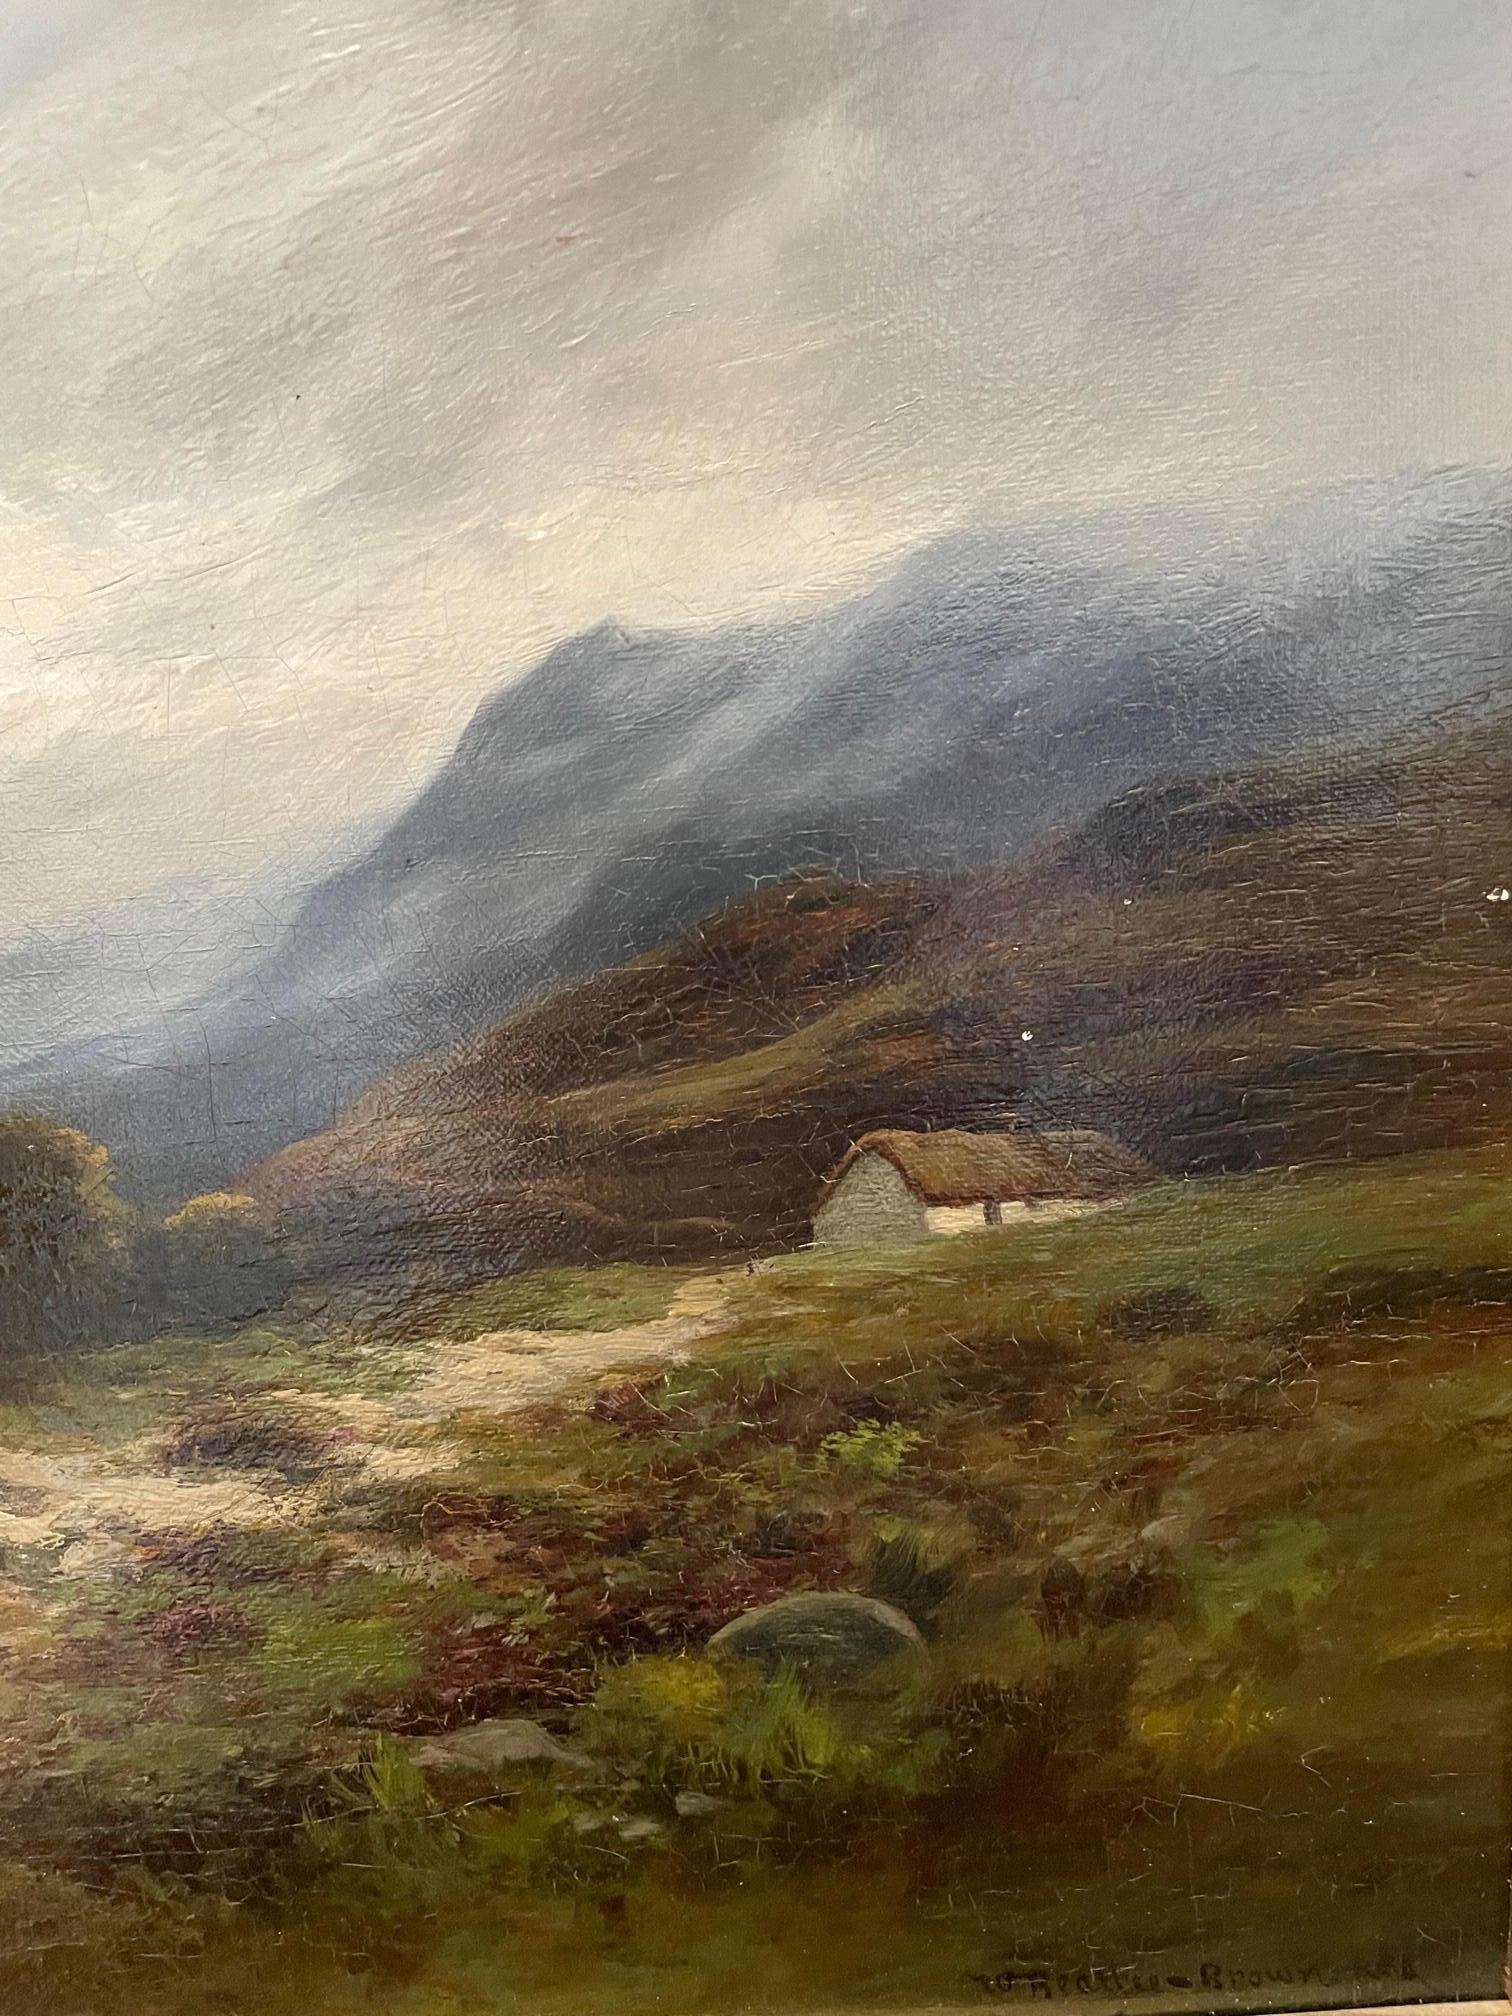 William Beattie-Brown, RSA, (1831-1909) painted landscapes with great mastery of the elements, known for his rendering of rapids in waters and detailed foliage far in the distance. His work often has a tonal quality, before his time. 'Cottage in the